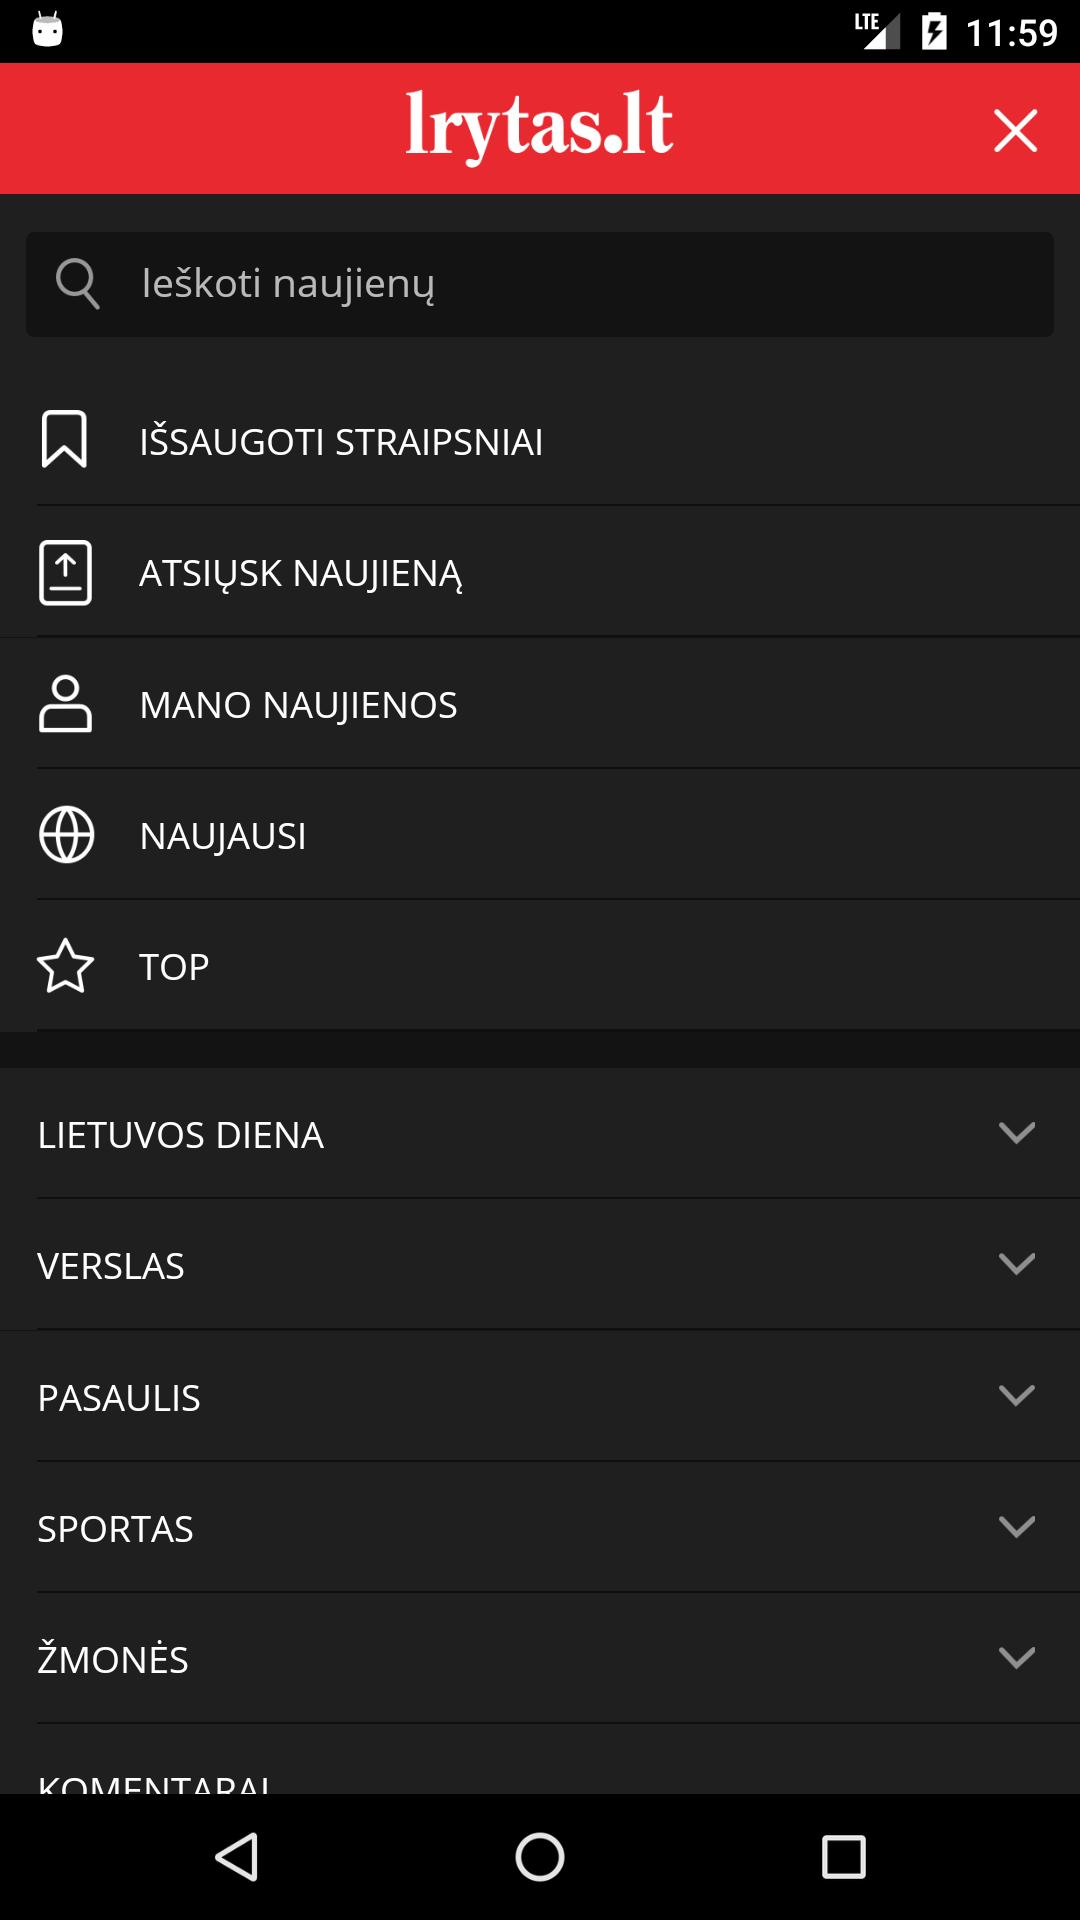 lrytas.lt for Android - APK Download